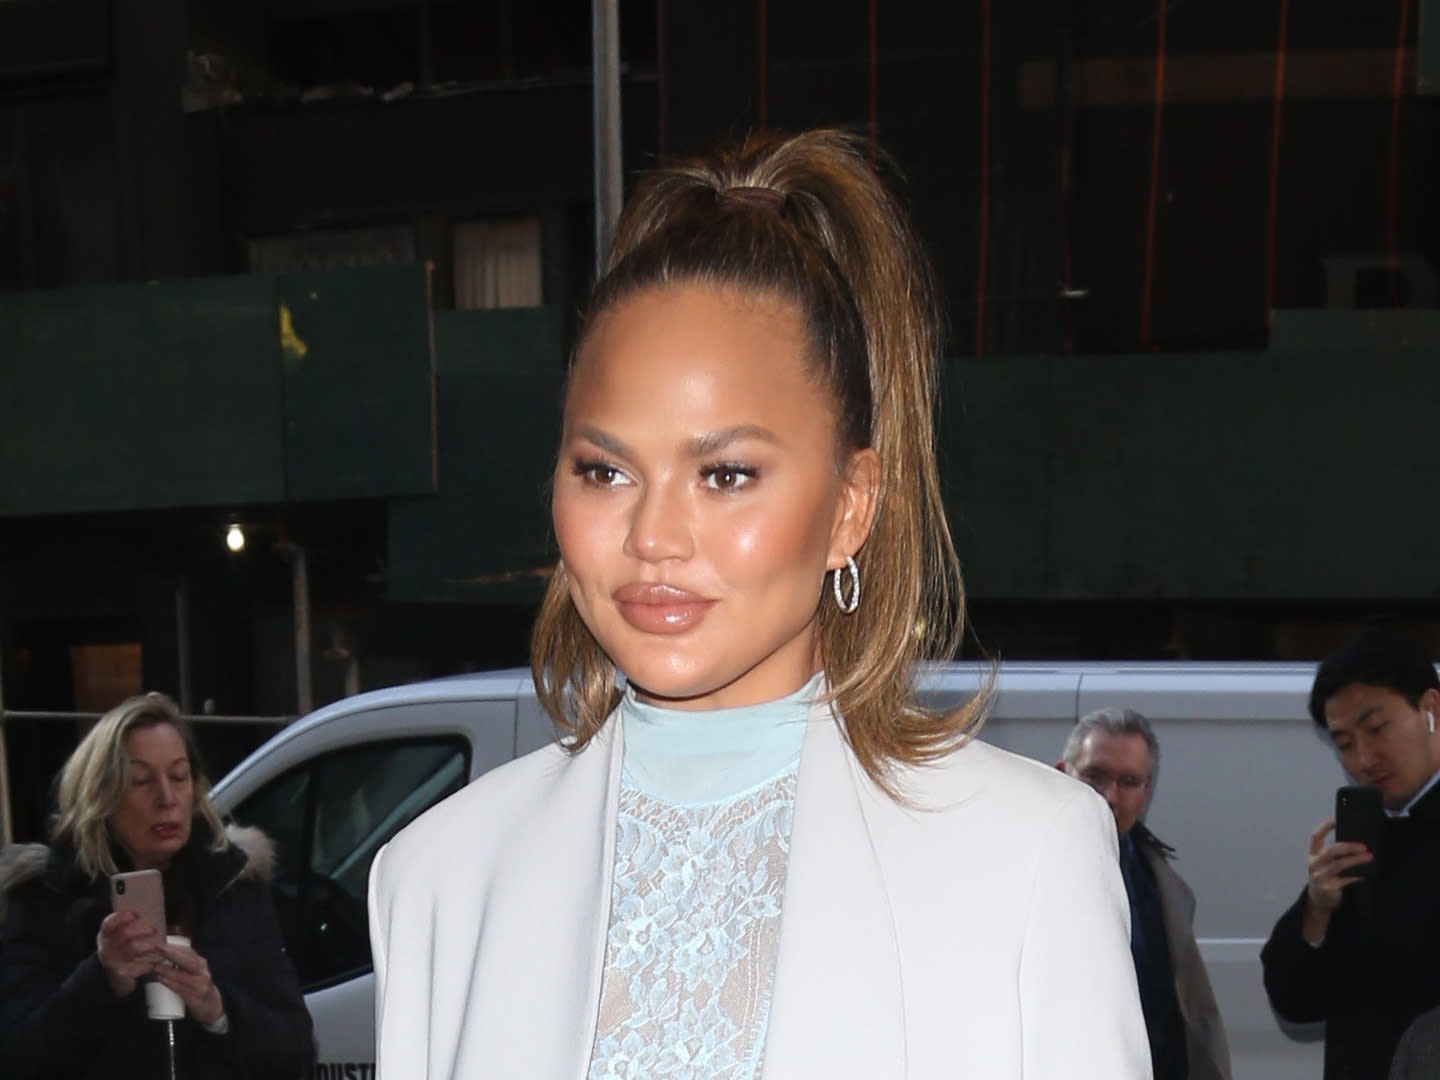 Chrissy Teigen honored baby Jack on his due date in the sweetest way